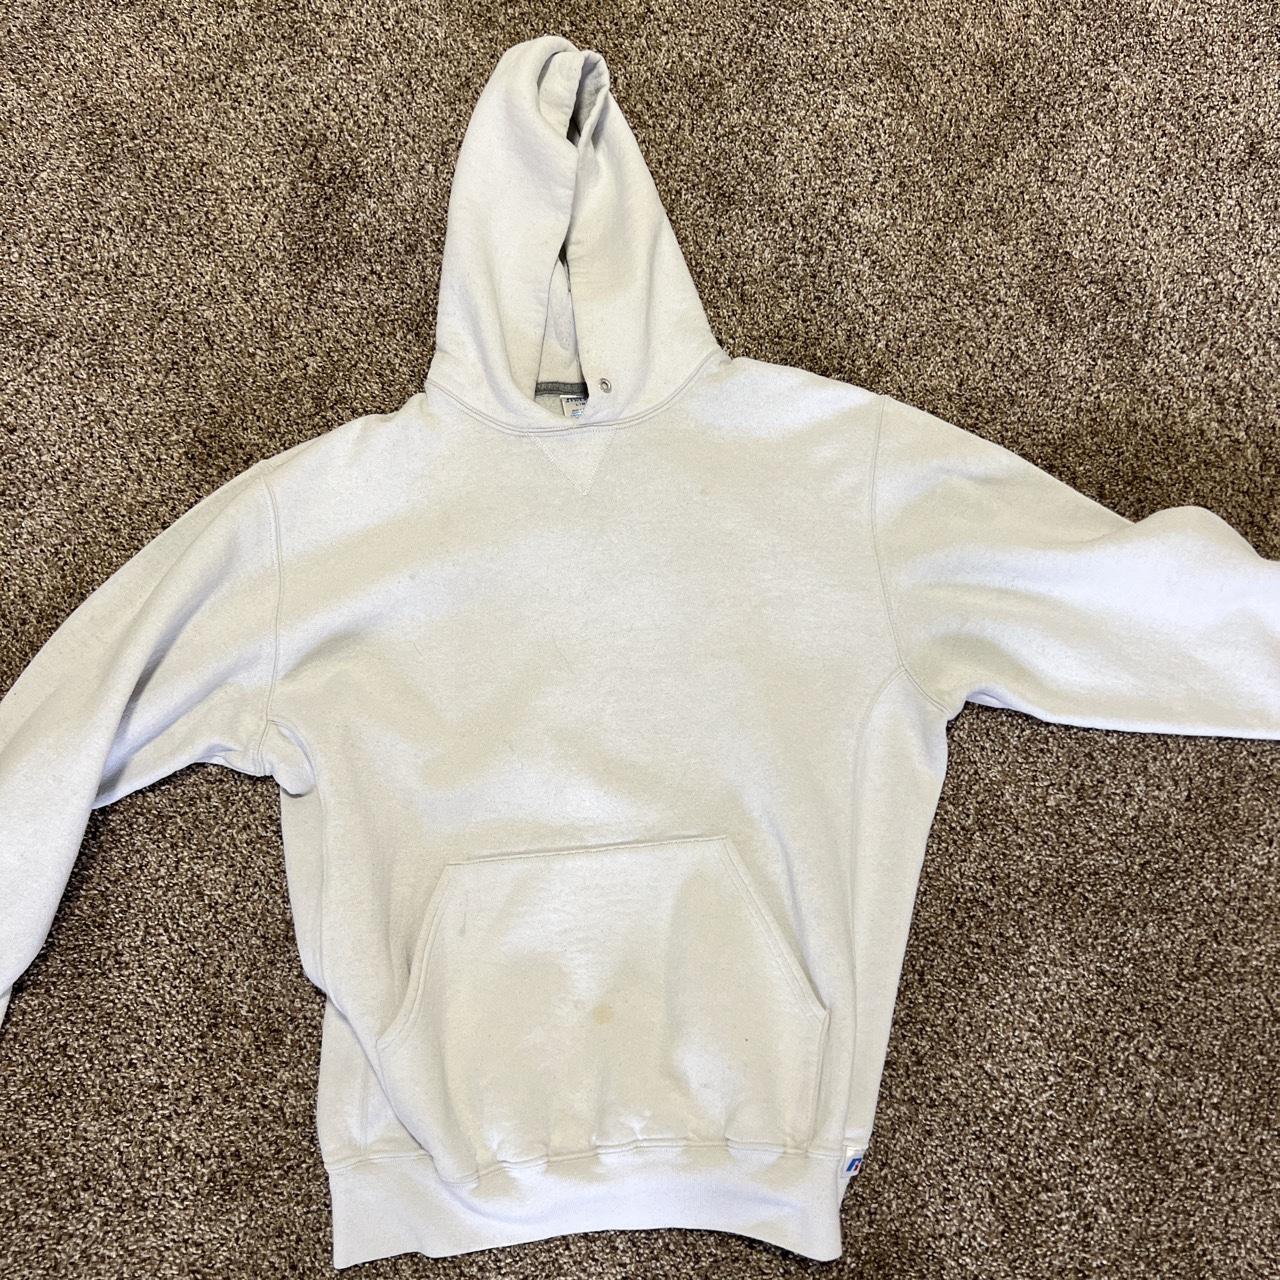 Russel tagged hoodie, small stain on the pocket - Depop